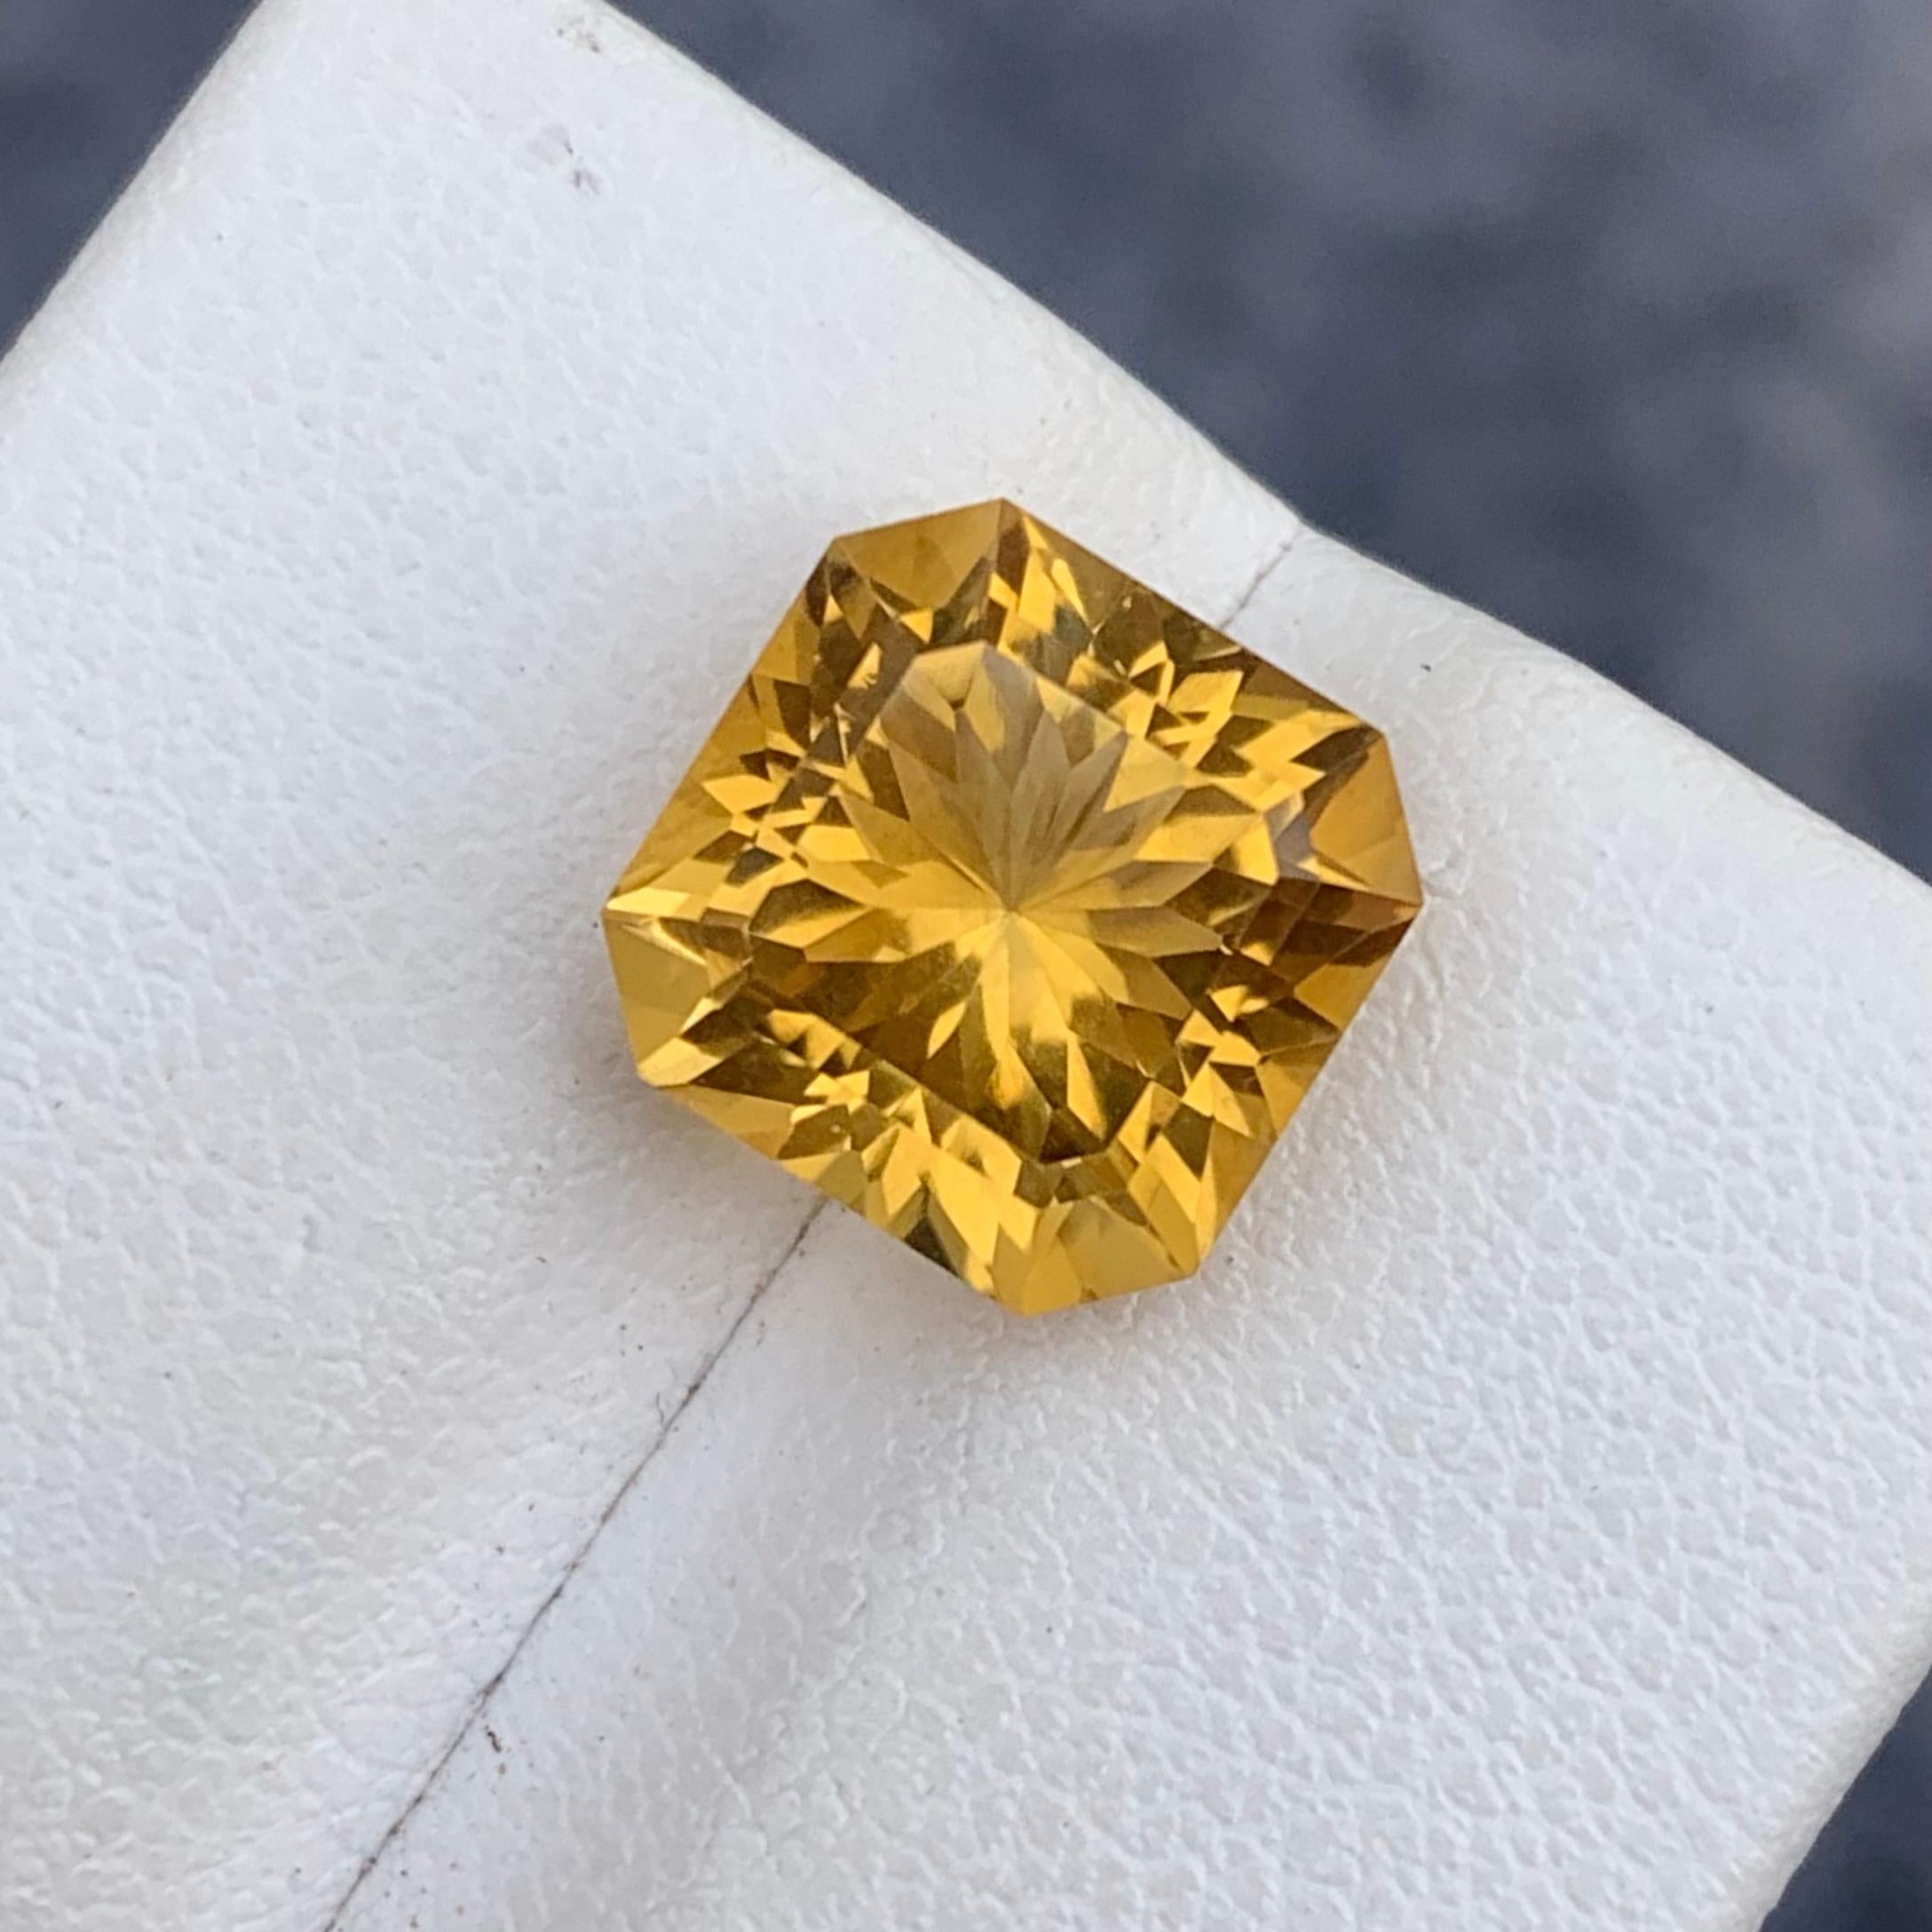 Gemstone Type : Citrine
Weight : 3.80 Carats
Dimensions : 9.3x9.2x7 mm
Clarity : Eye Clean
Origin : Brazil
Color: Yellow
Shape: Square
Cut/Facet: Flower
Certificate: On Demand
Month: November
.
The Many Healing Properties of Citrine
Increase